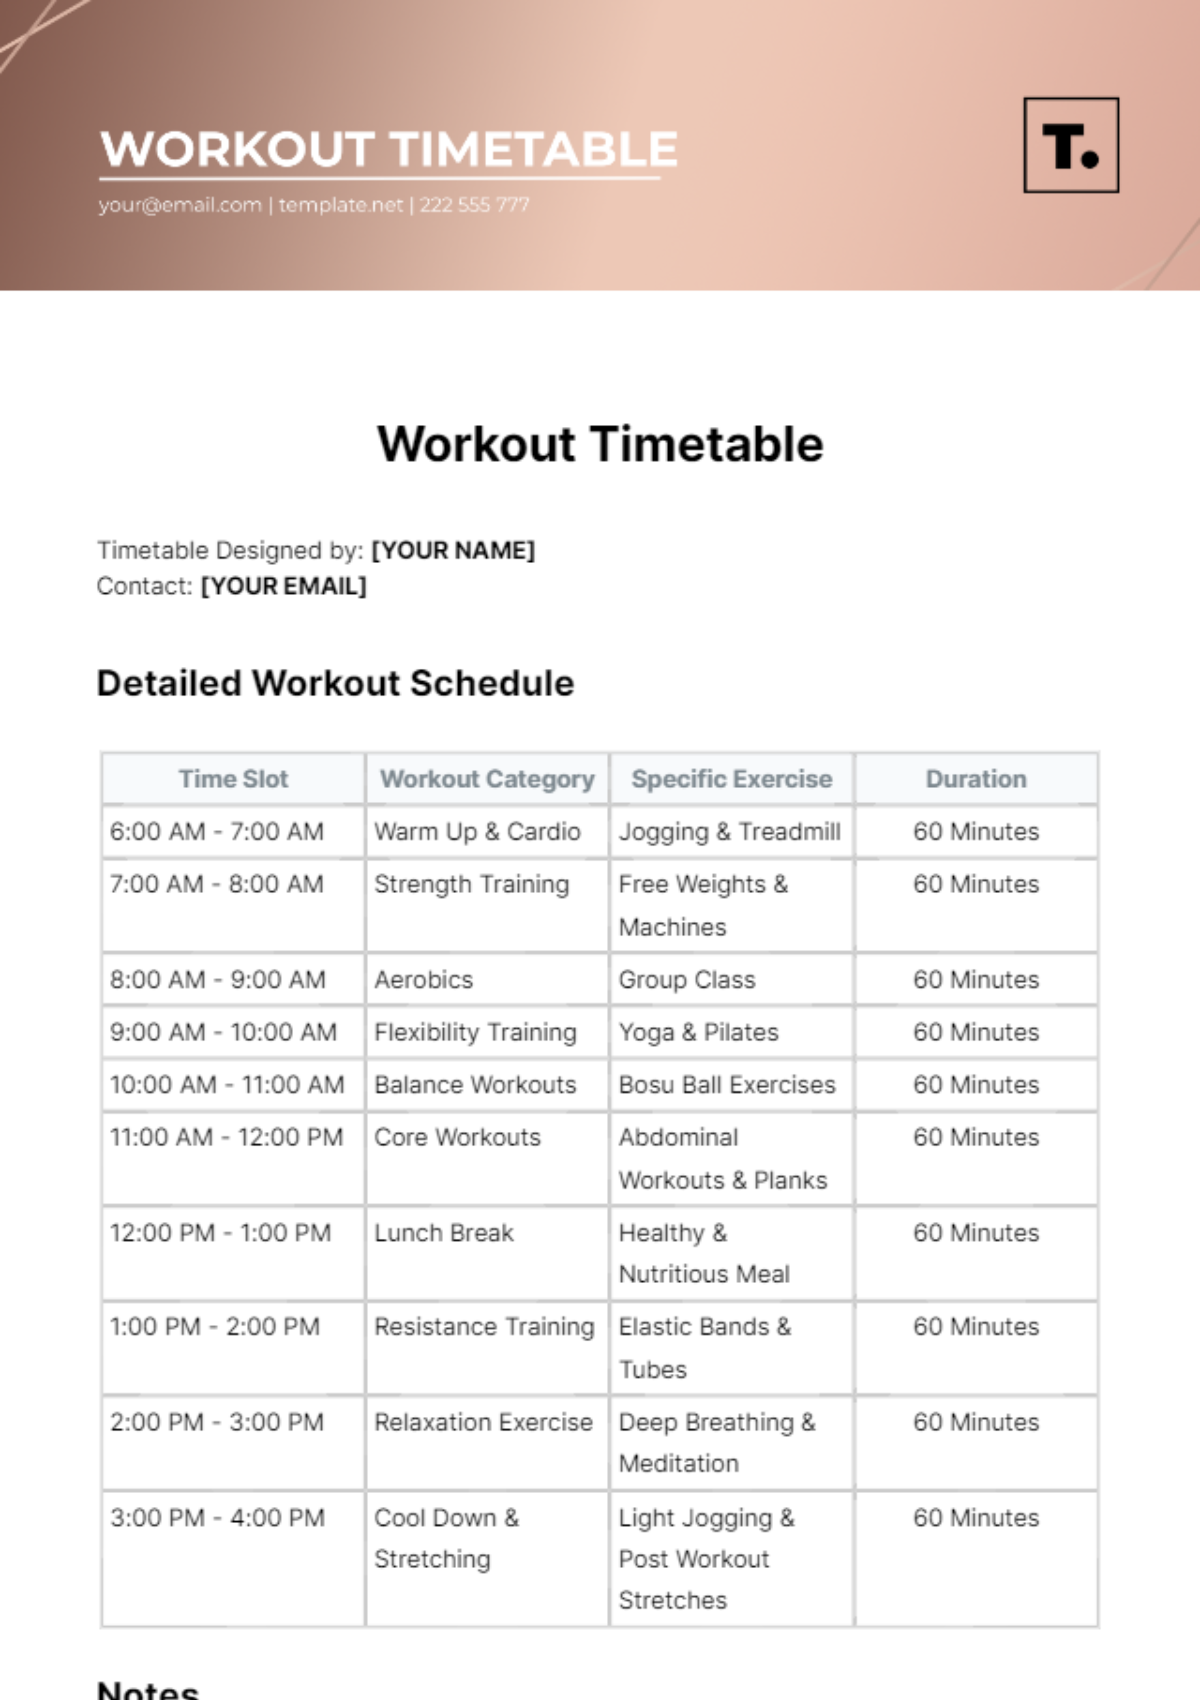 Workout Timetable Template 